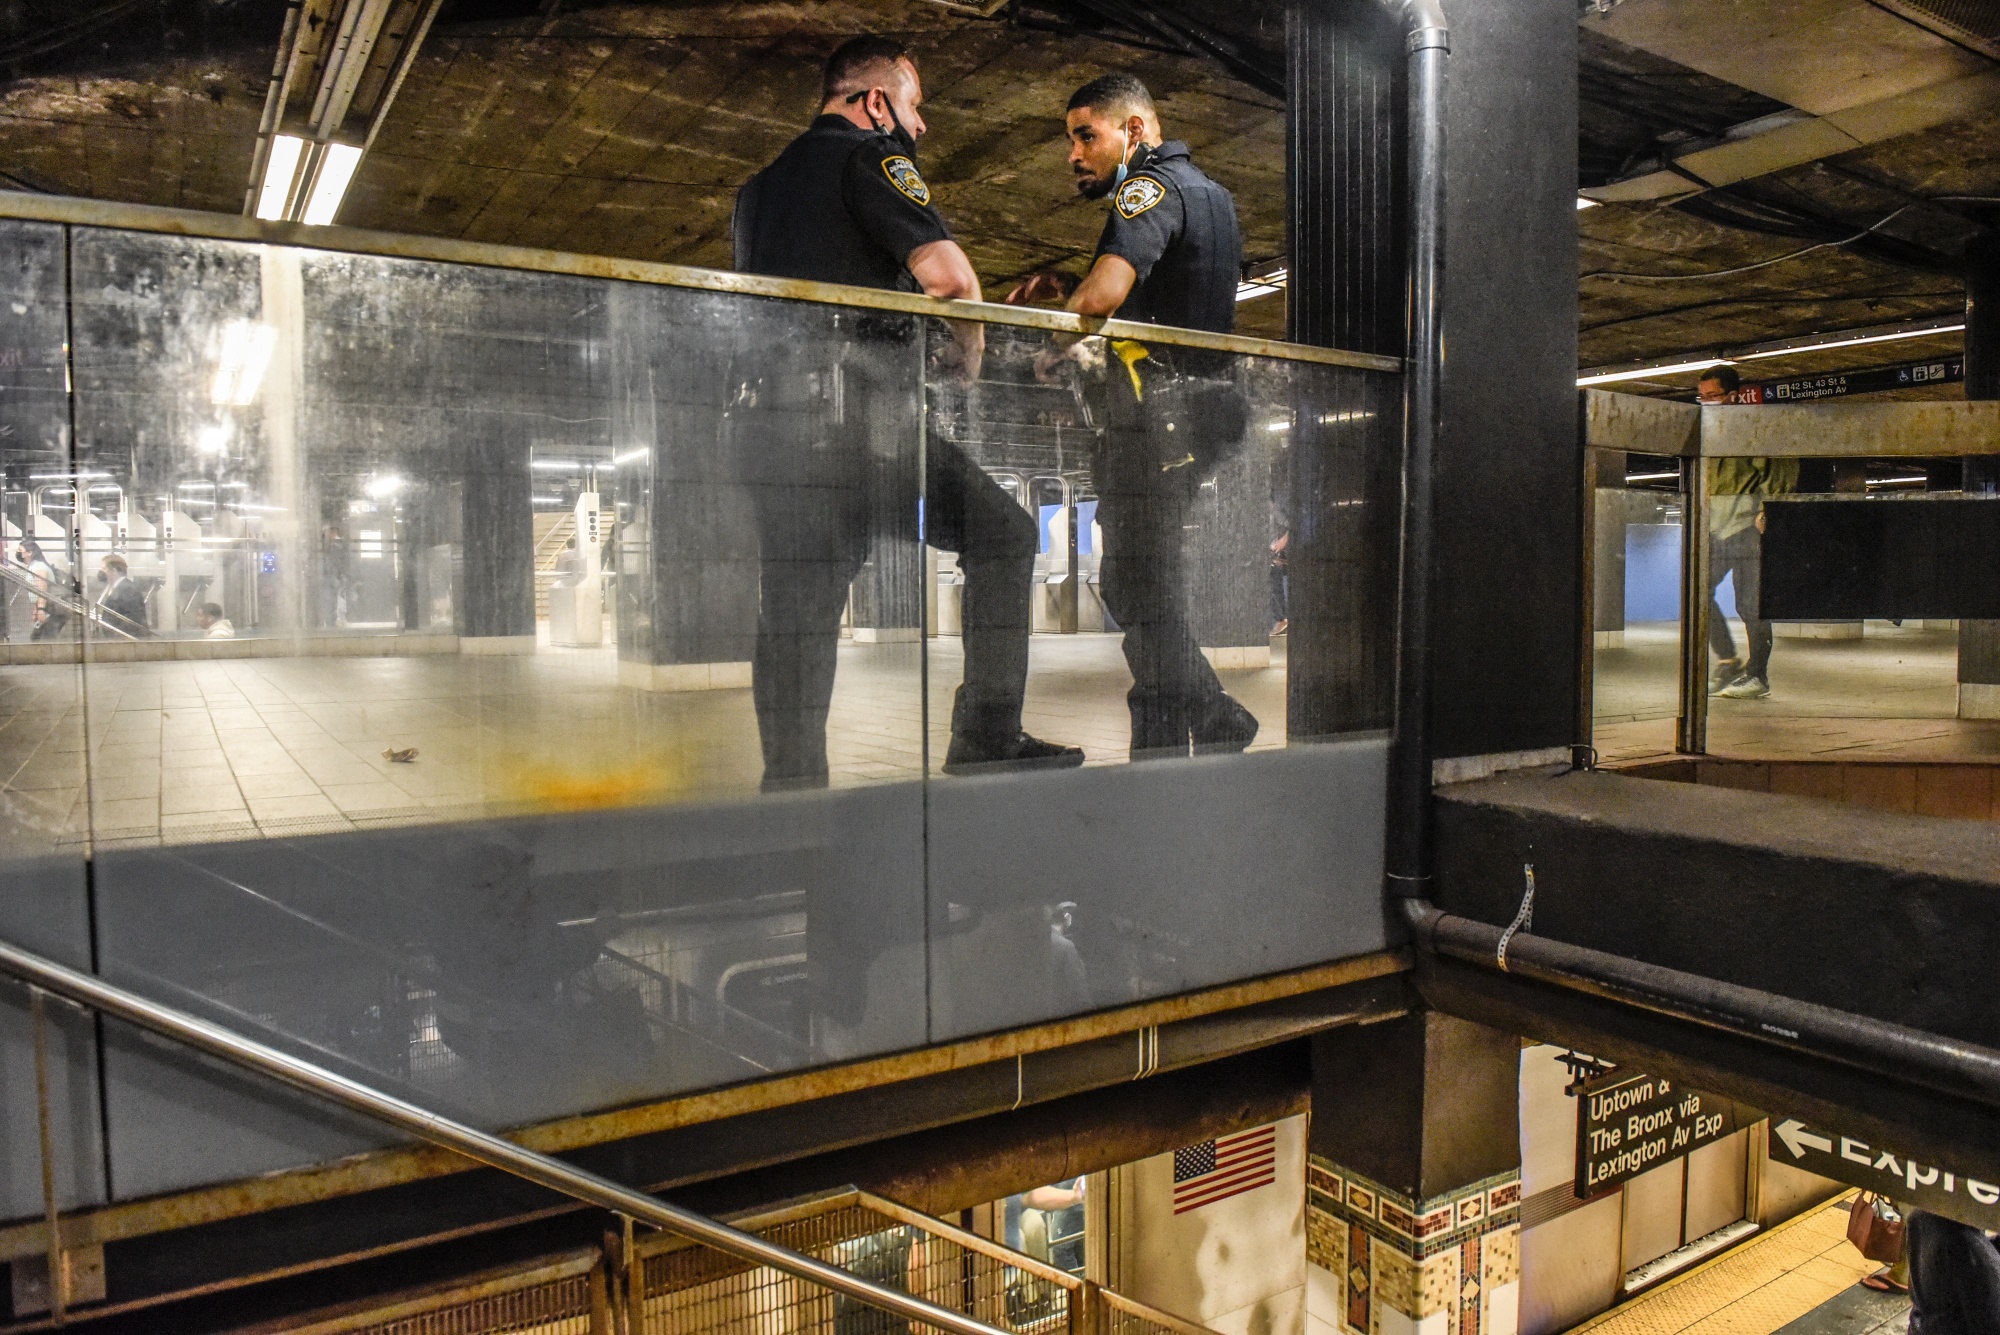 New York Police Department (NYPD) officers patrol inside the Times Square subway station in New York, US, on Wednesday, May 25, 2022.&nbsp;